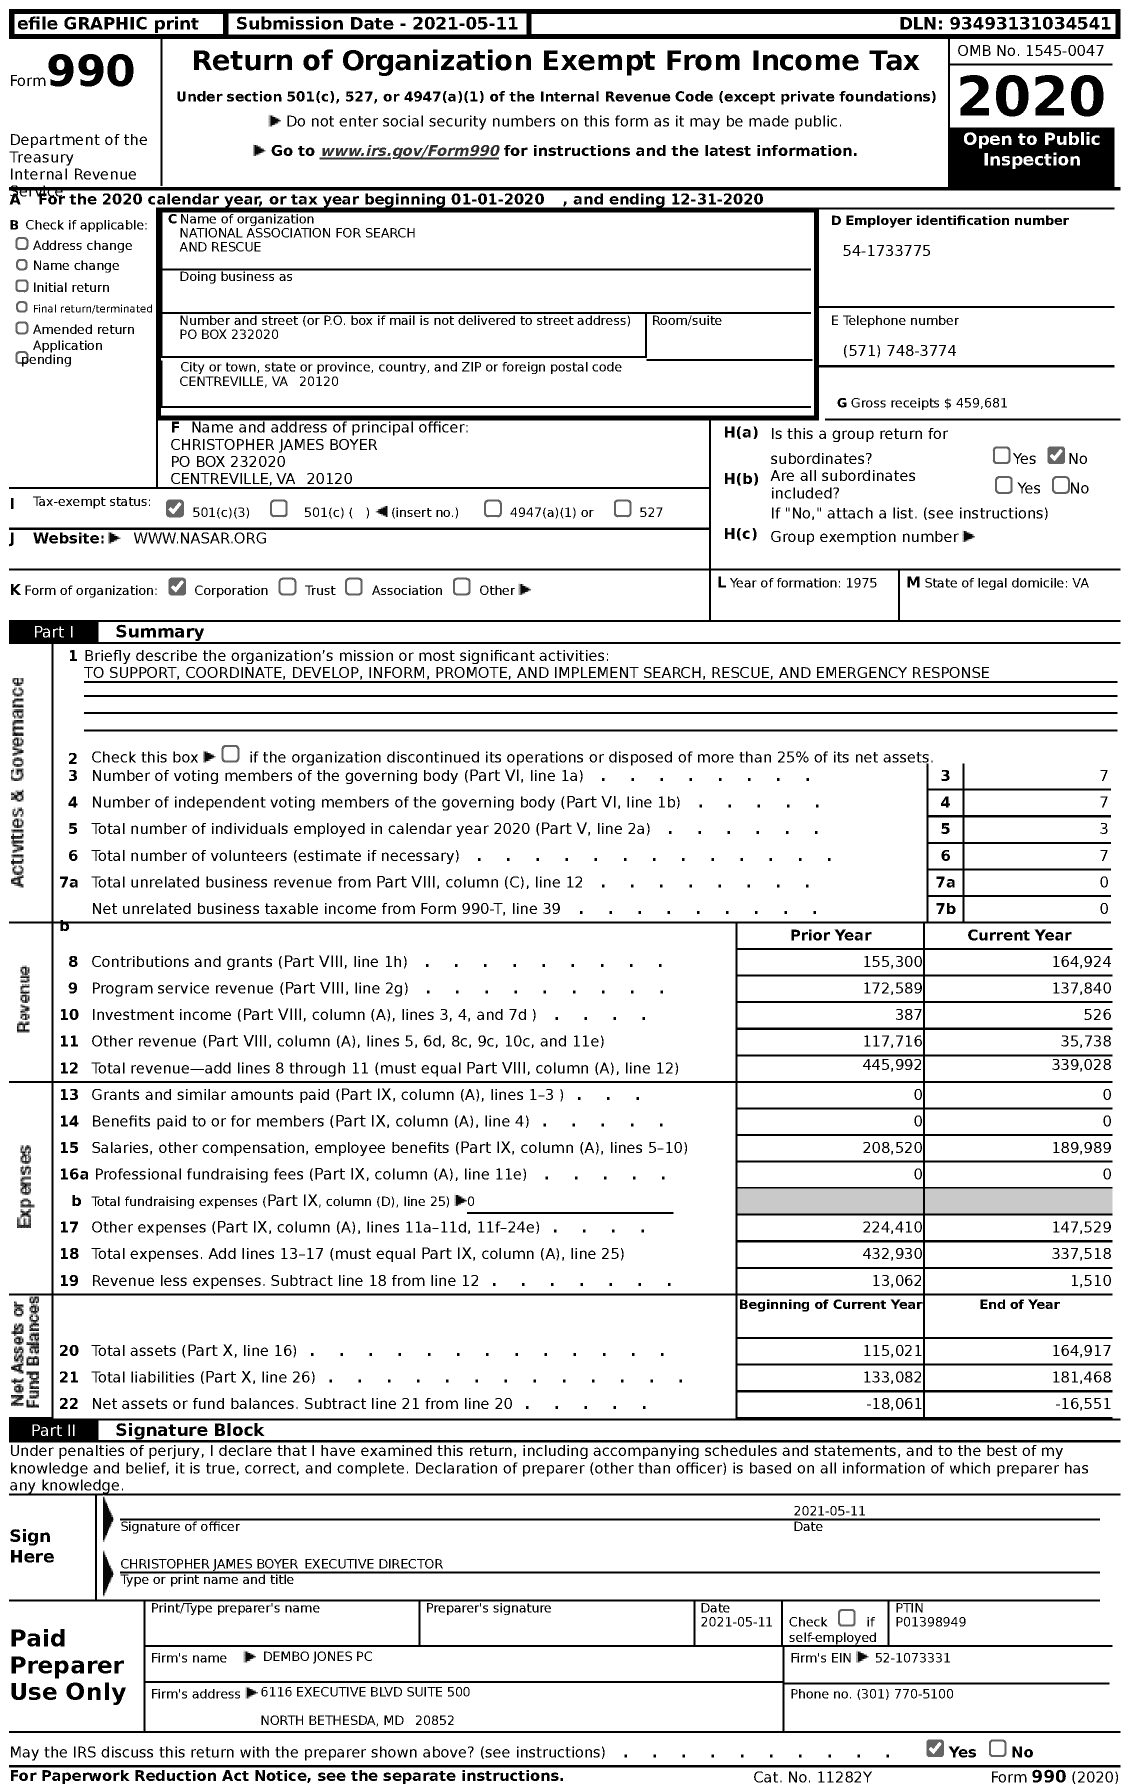 Image of first page of 2020 Form 990 for NATionaL ASSOCIATION FOR SEARCH AND RESCUE